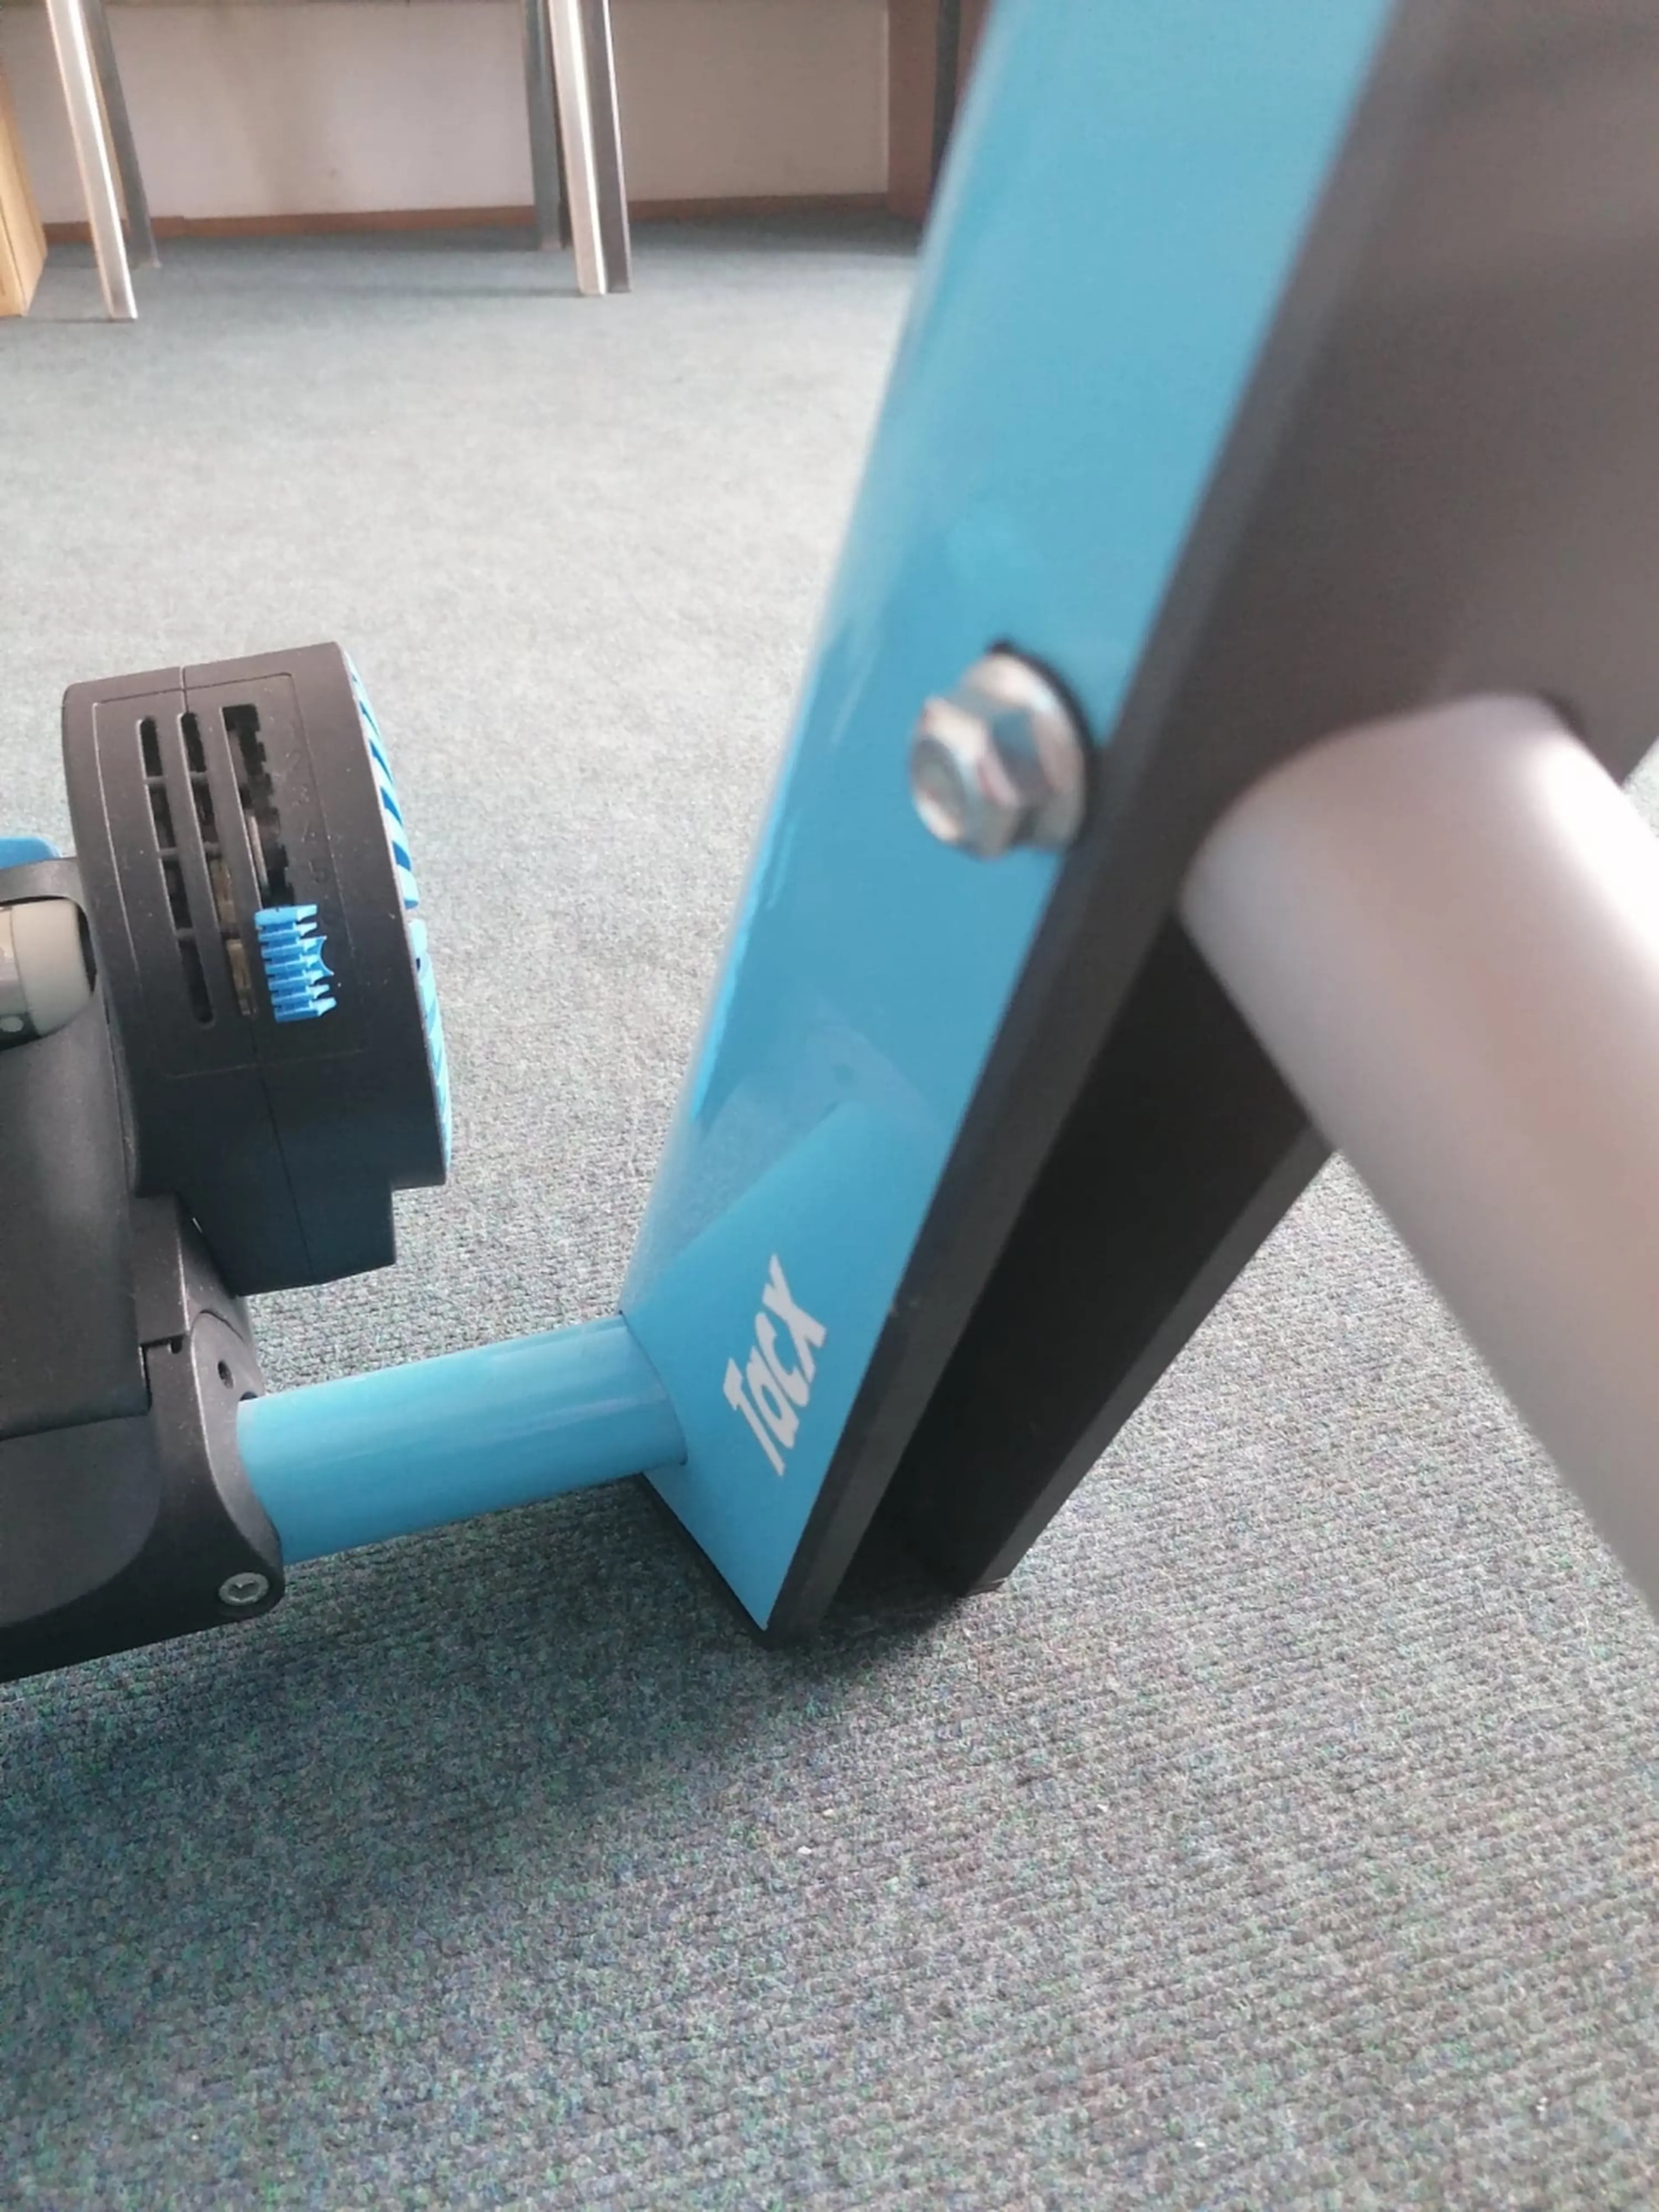 6. Home Trainer Tacx